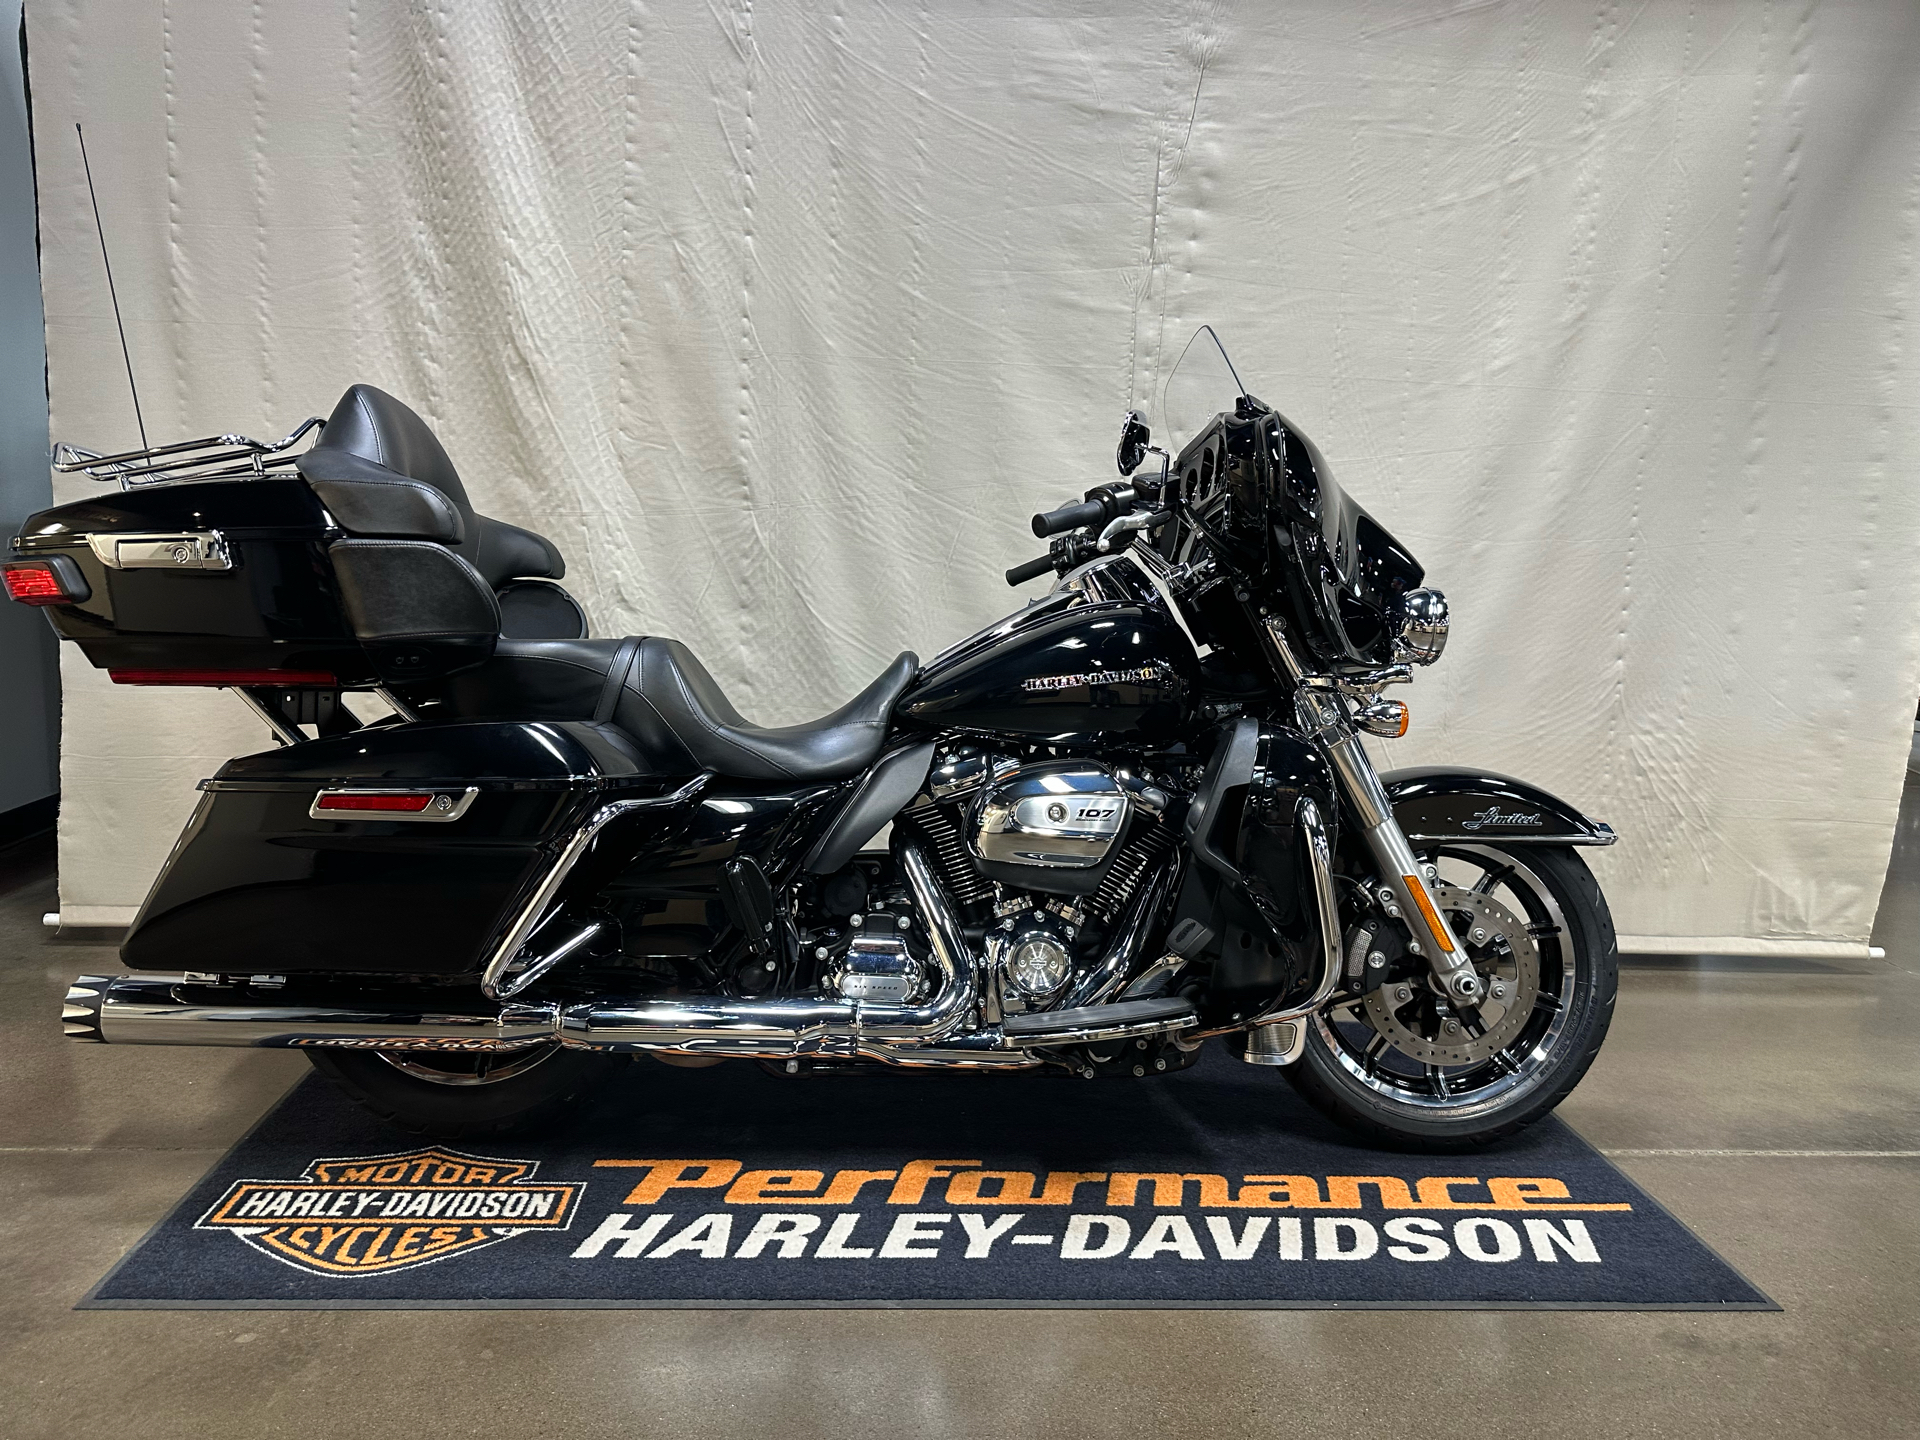 2018 Harley-Davidson Ultra Limited Low in Syracuse, New York - Photo 1